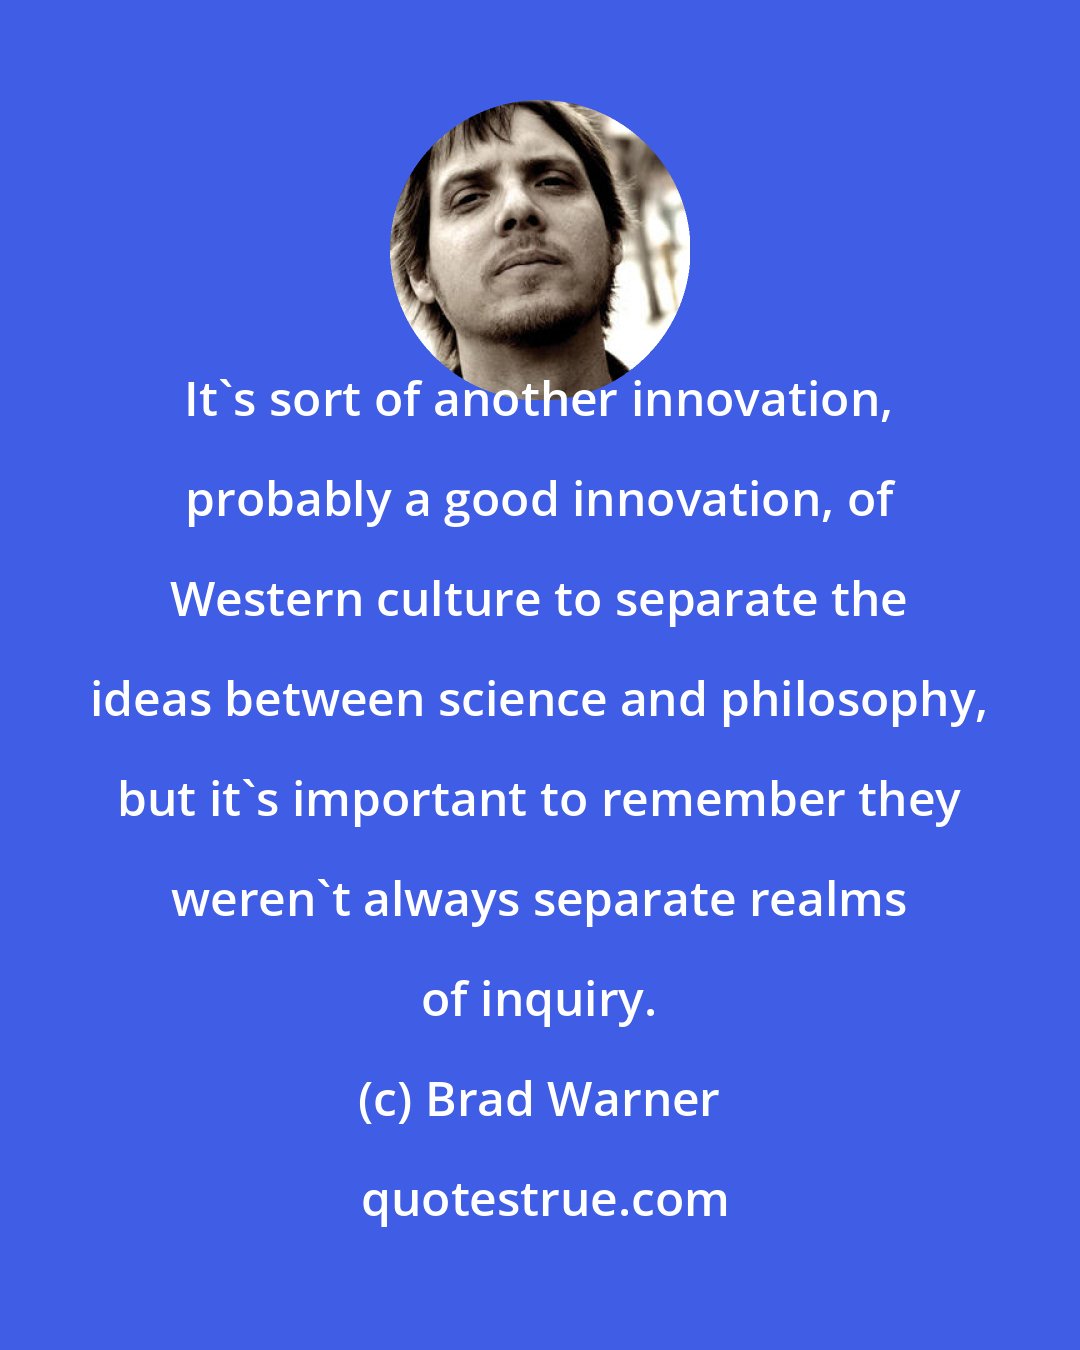 Brad Warner: It's sort of another innovation, probably a good innovation, of Western culture to separate the ideas between science and philosophy, but it's important to remember they weren't always separate realms of inquiry.